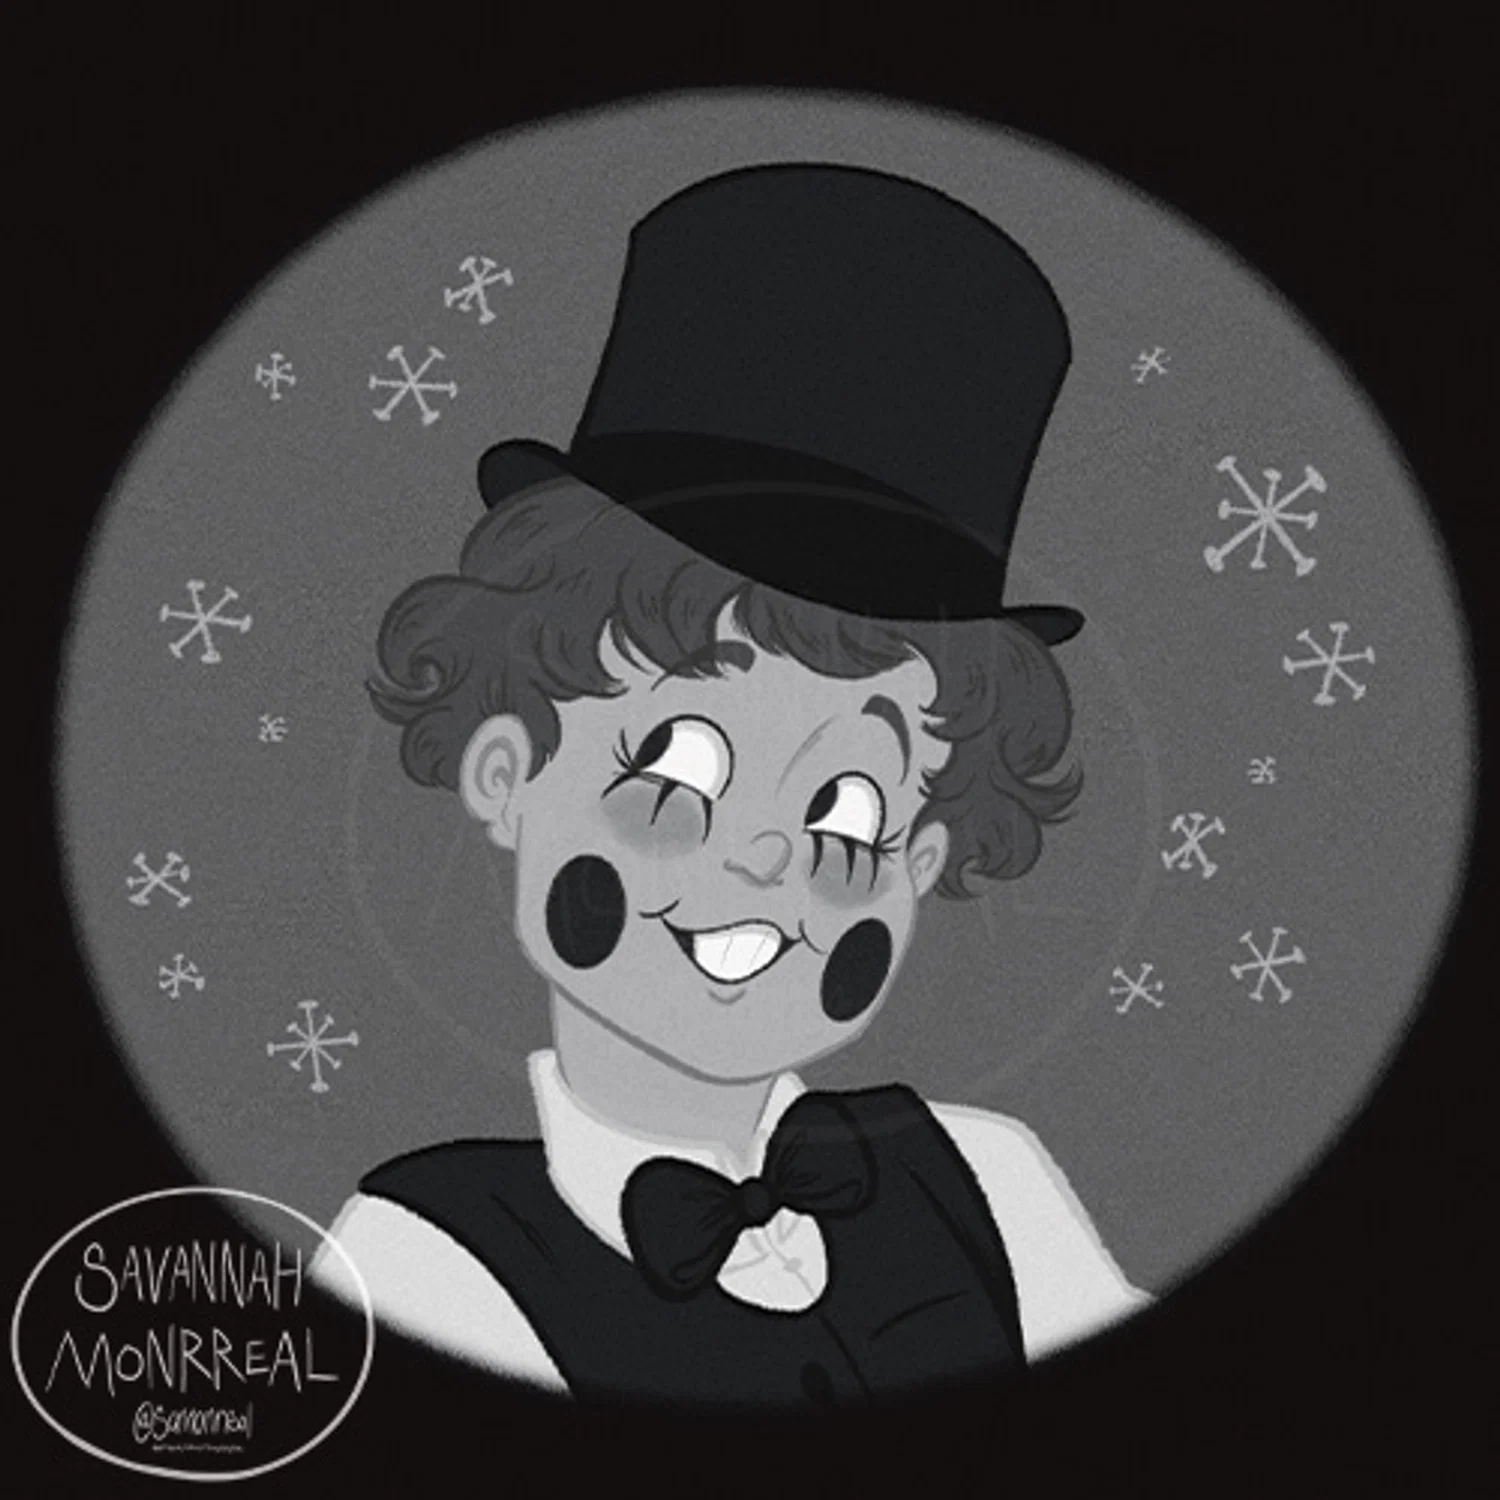 Main character is smiling and wearing a tuxedo and a top hat. He is placed within a grey circle with mid-century sparkled while the background is all black. Image is monochrome. There is a watermark in the corner that says "Savannah Monrreal @samonrreal"